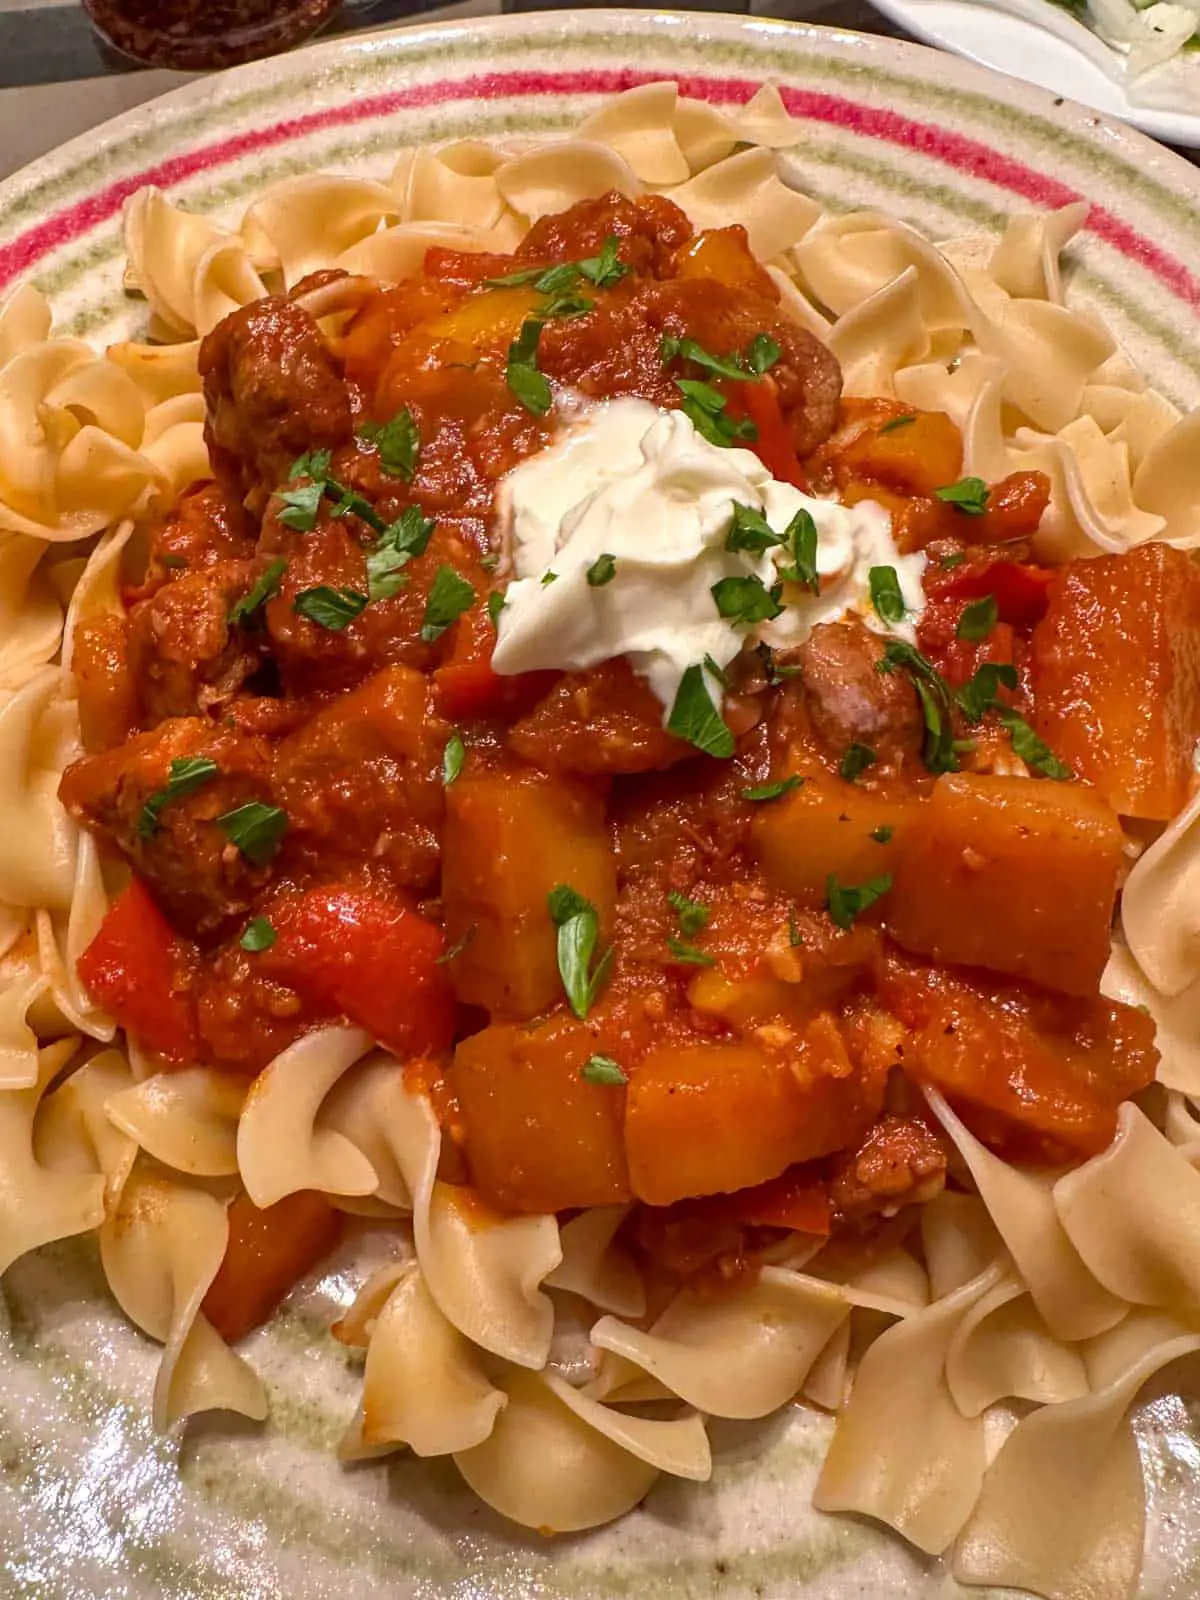 Hungarian Pork Goulash atop egg noodles garnished with sour cream and parsley.